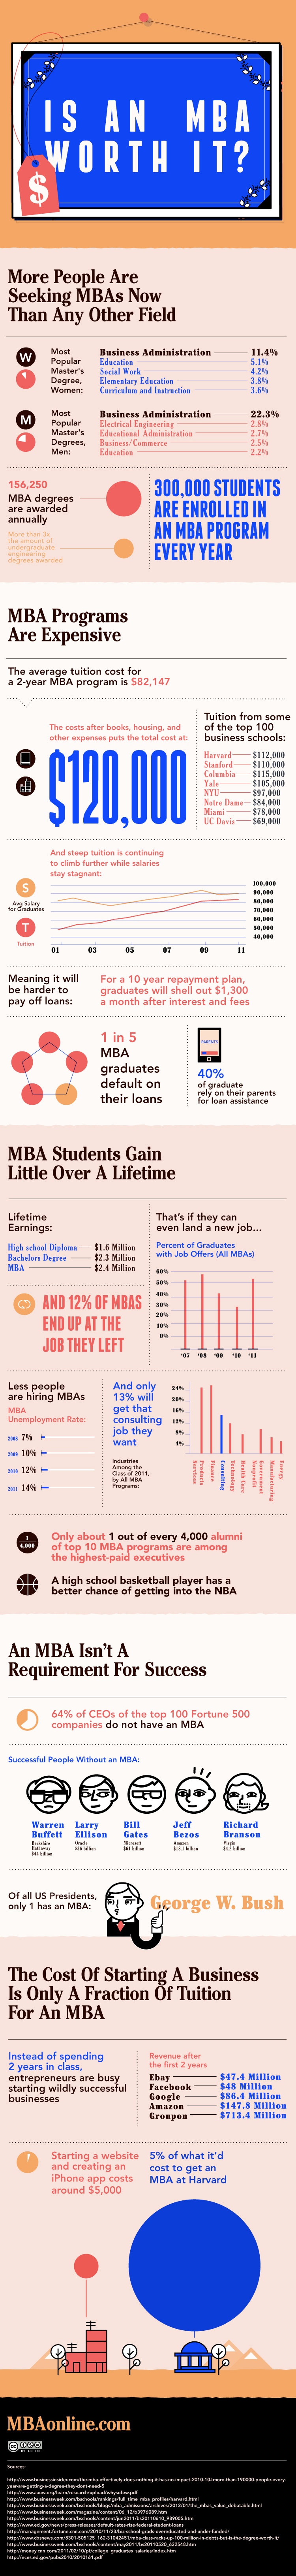 Would you rather get an MBA or start a business?